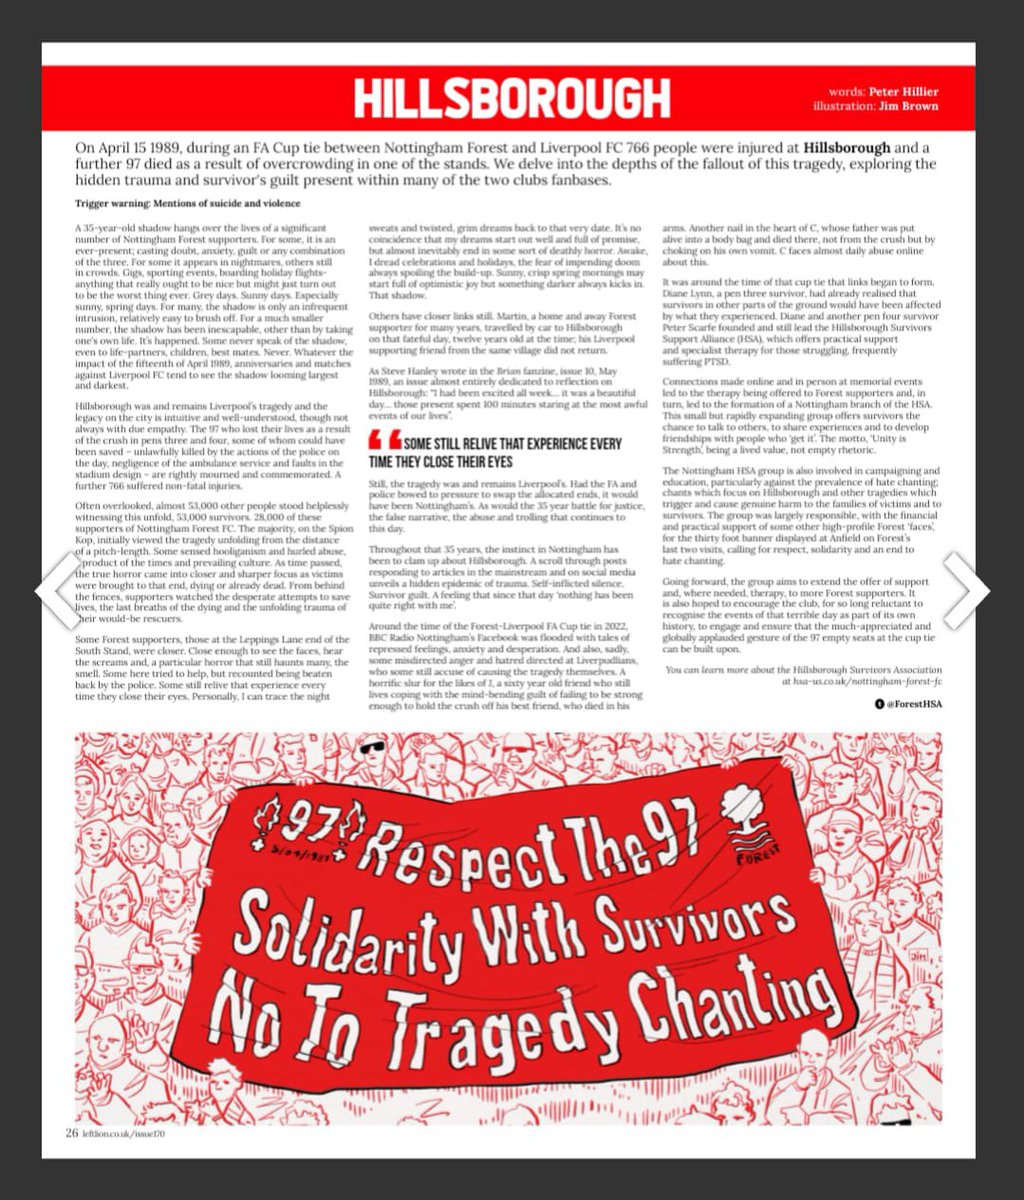 Very, very grateful to the lovely people at @LeftLion, Nottingham’s listings and cultural monthly, for encouraging me to write this piece on the continuing aftershocks of #hillsborough and then publishing it today. ❤️🔥🤝✊